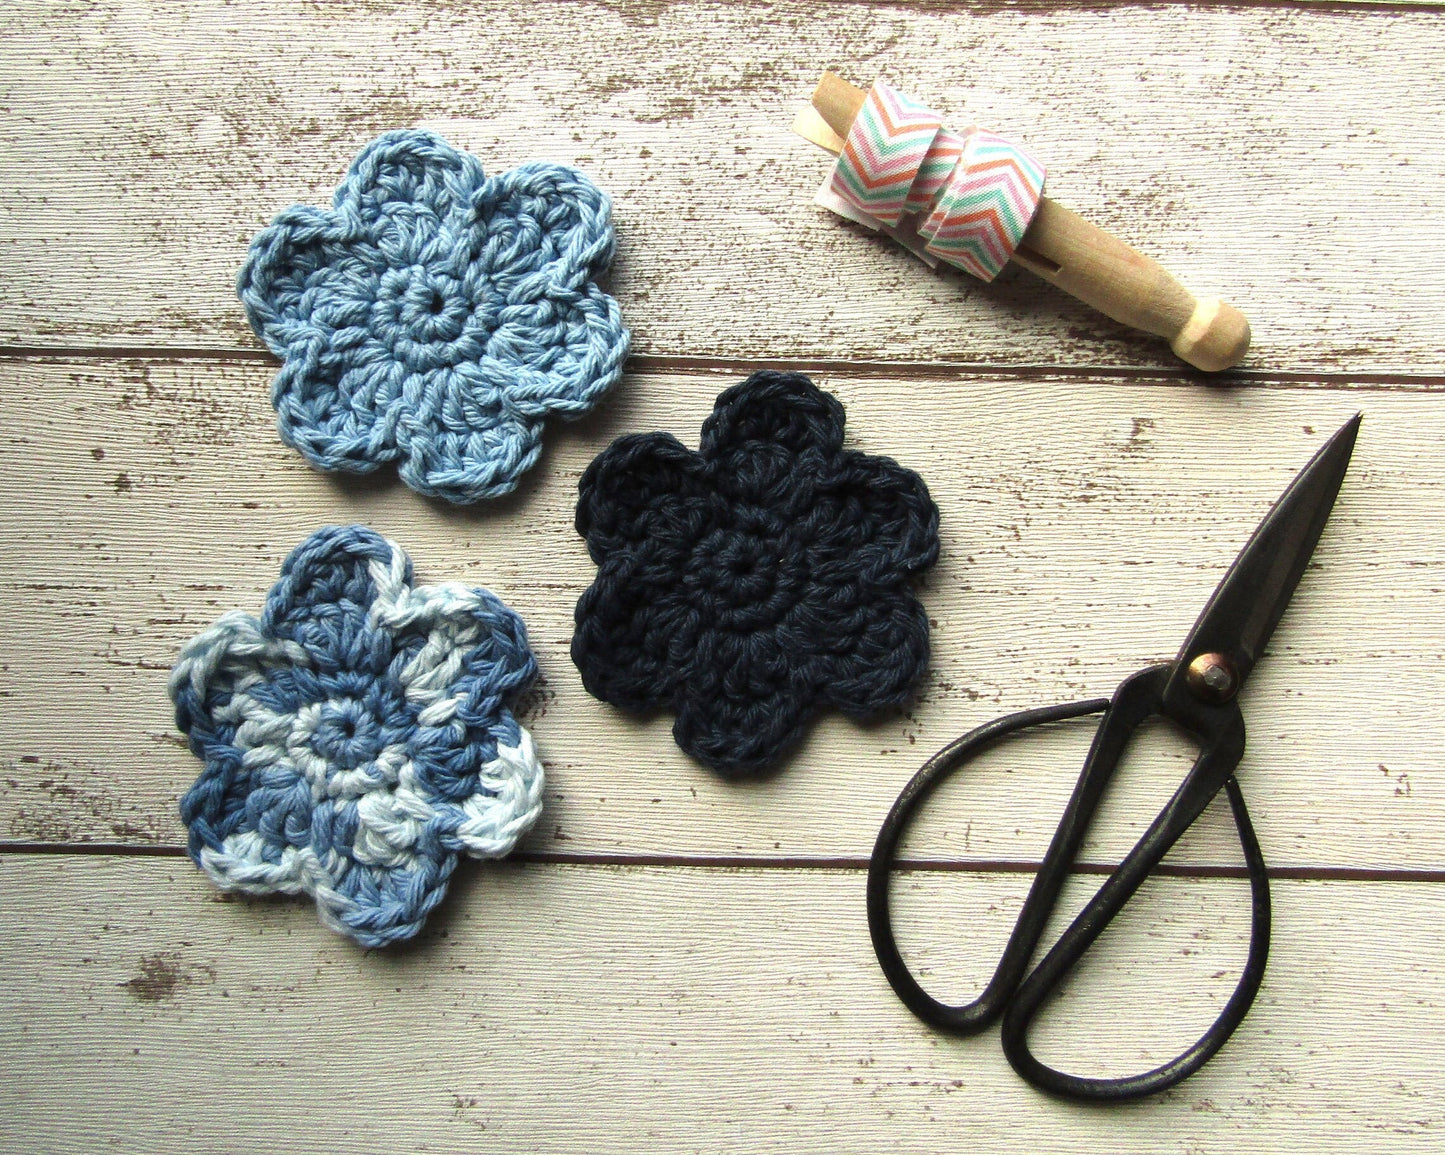 Crocheted reusable Make up pads